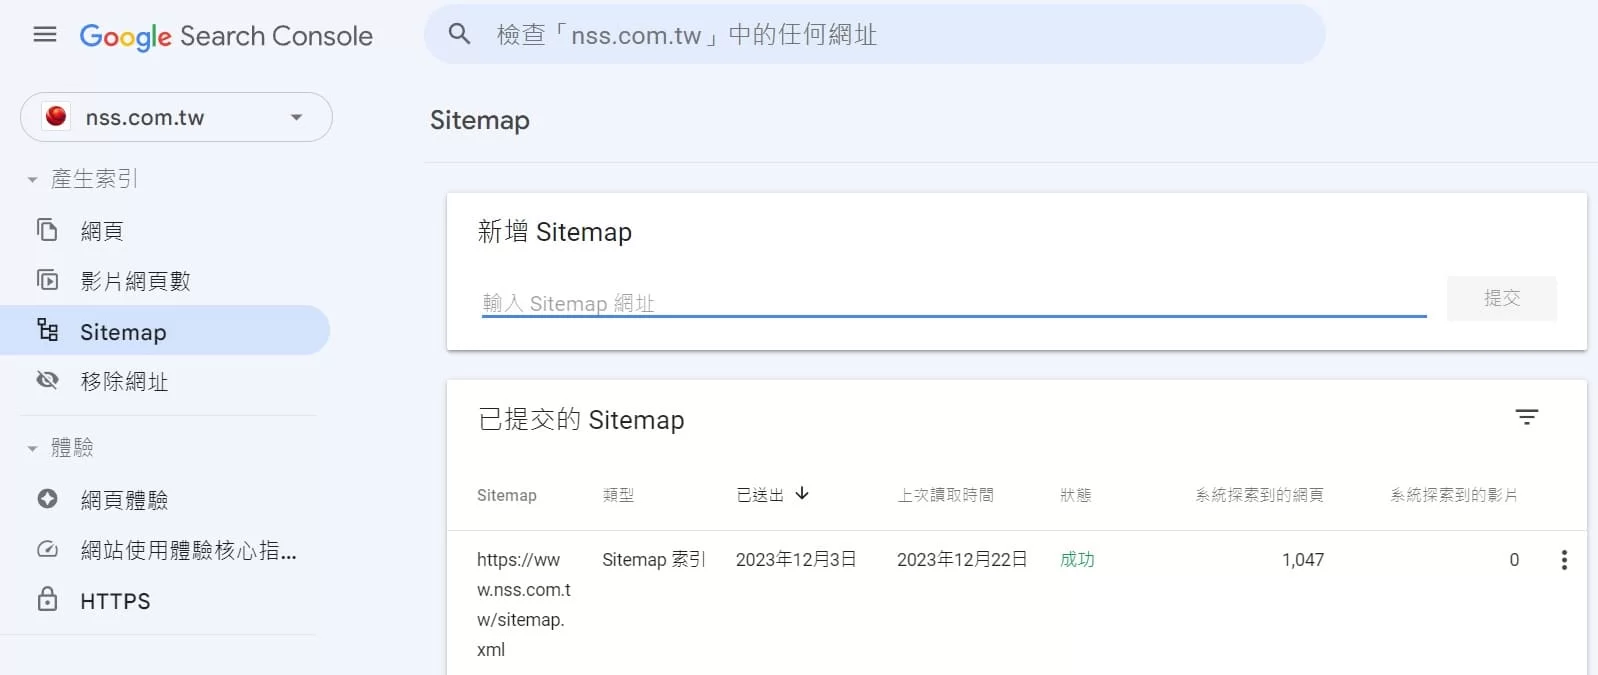 Google Search Console教學-sitemap提交